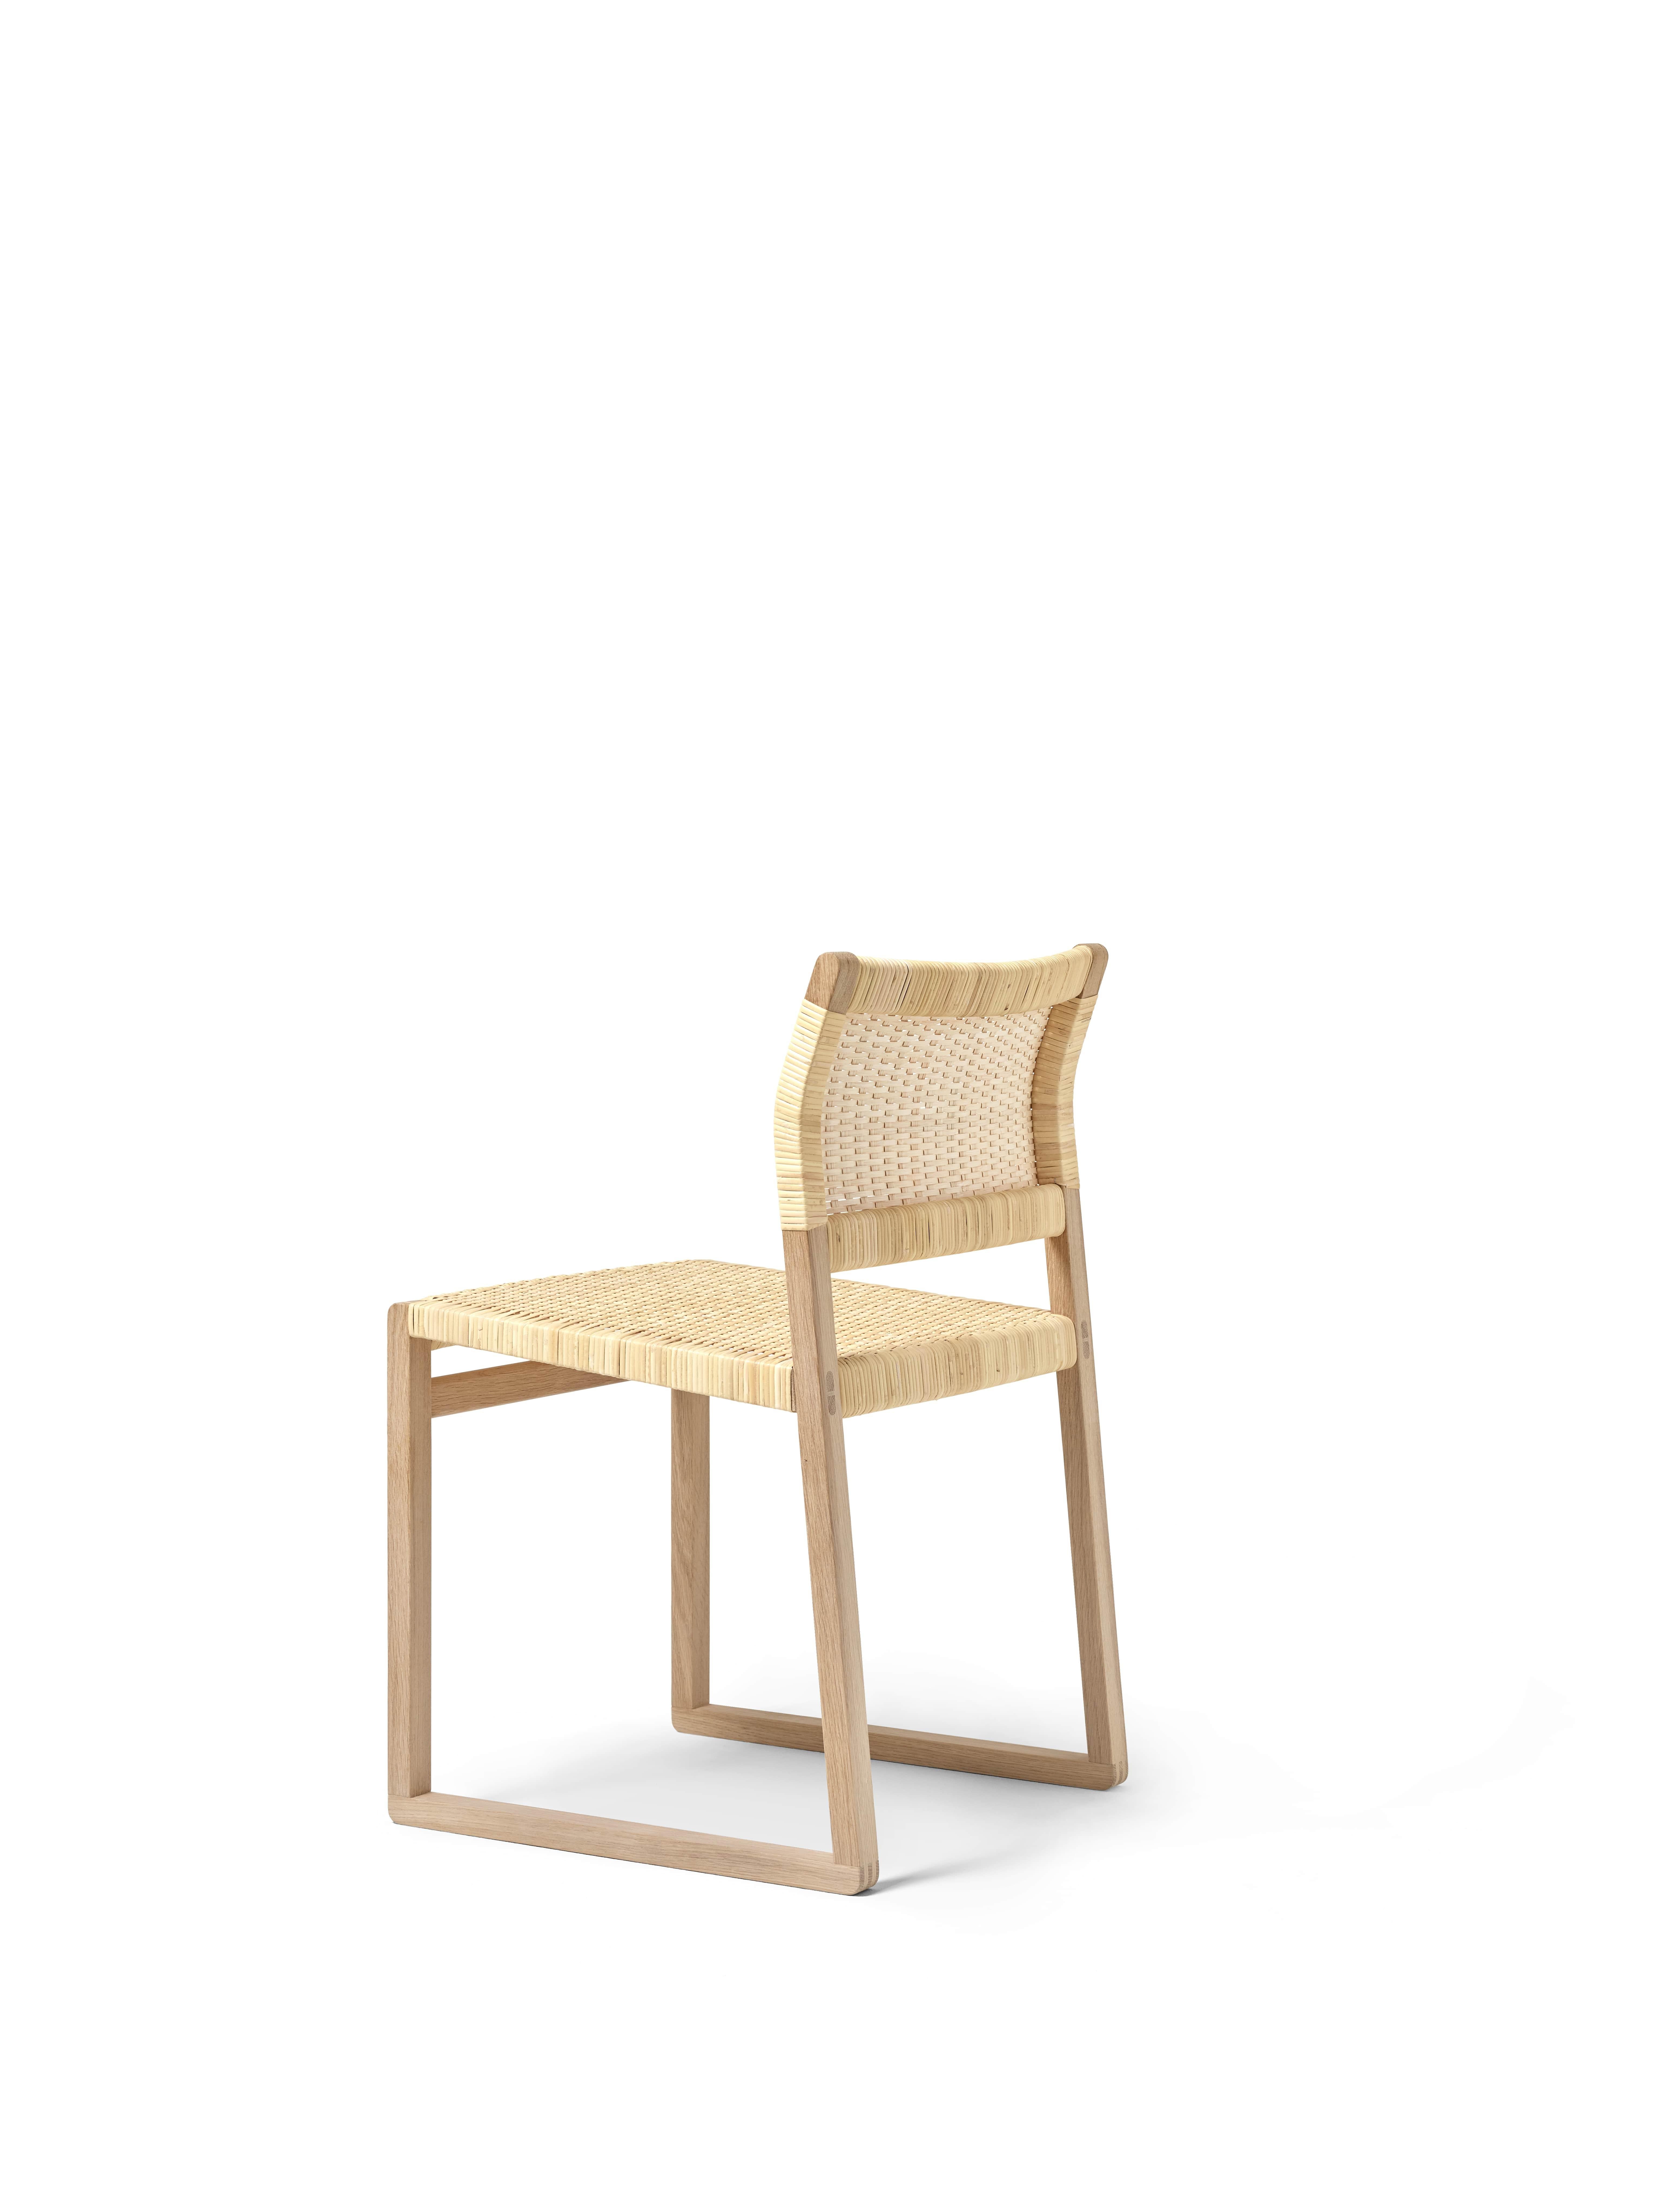 Scandinavian Modern BM61 Chair, Lacquered Oak/Natural Cane Wicker, by Børge Mogensen for Fredericia For Sale